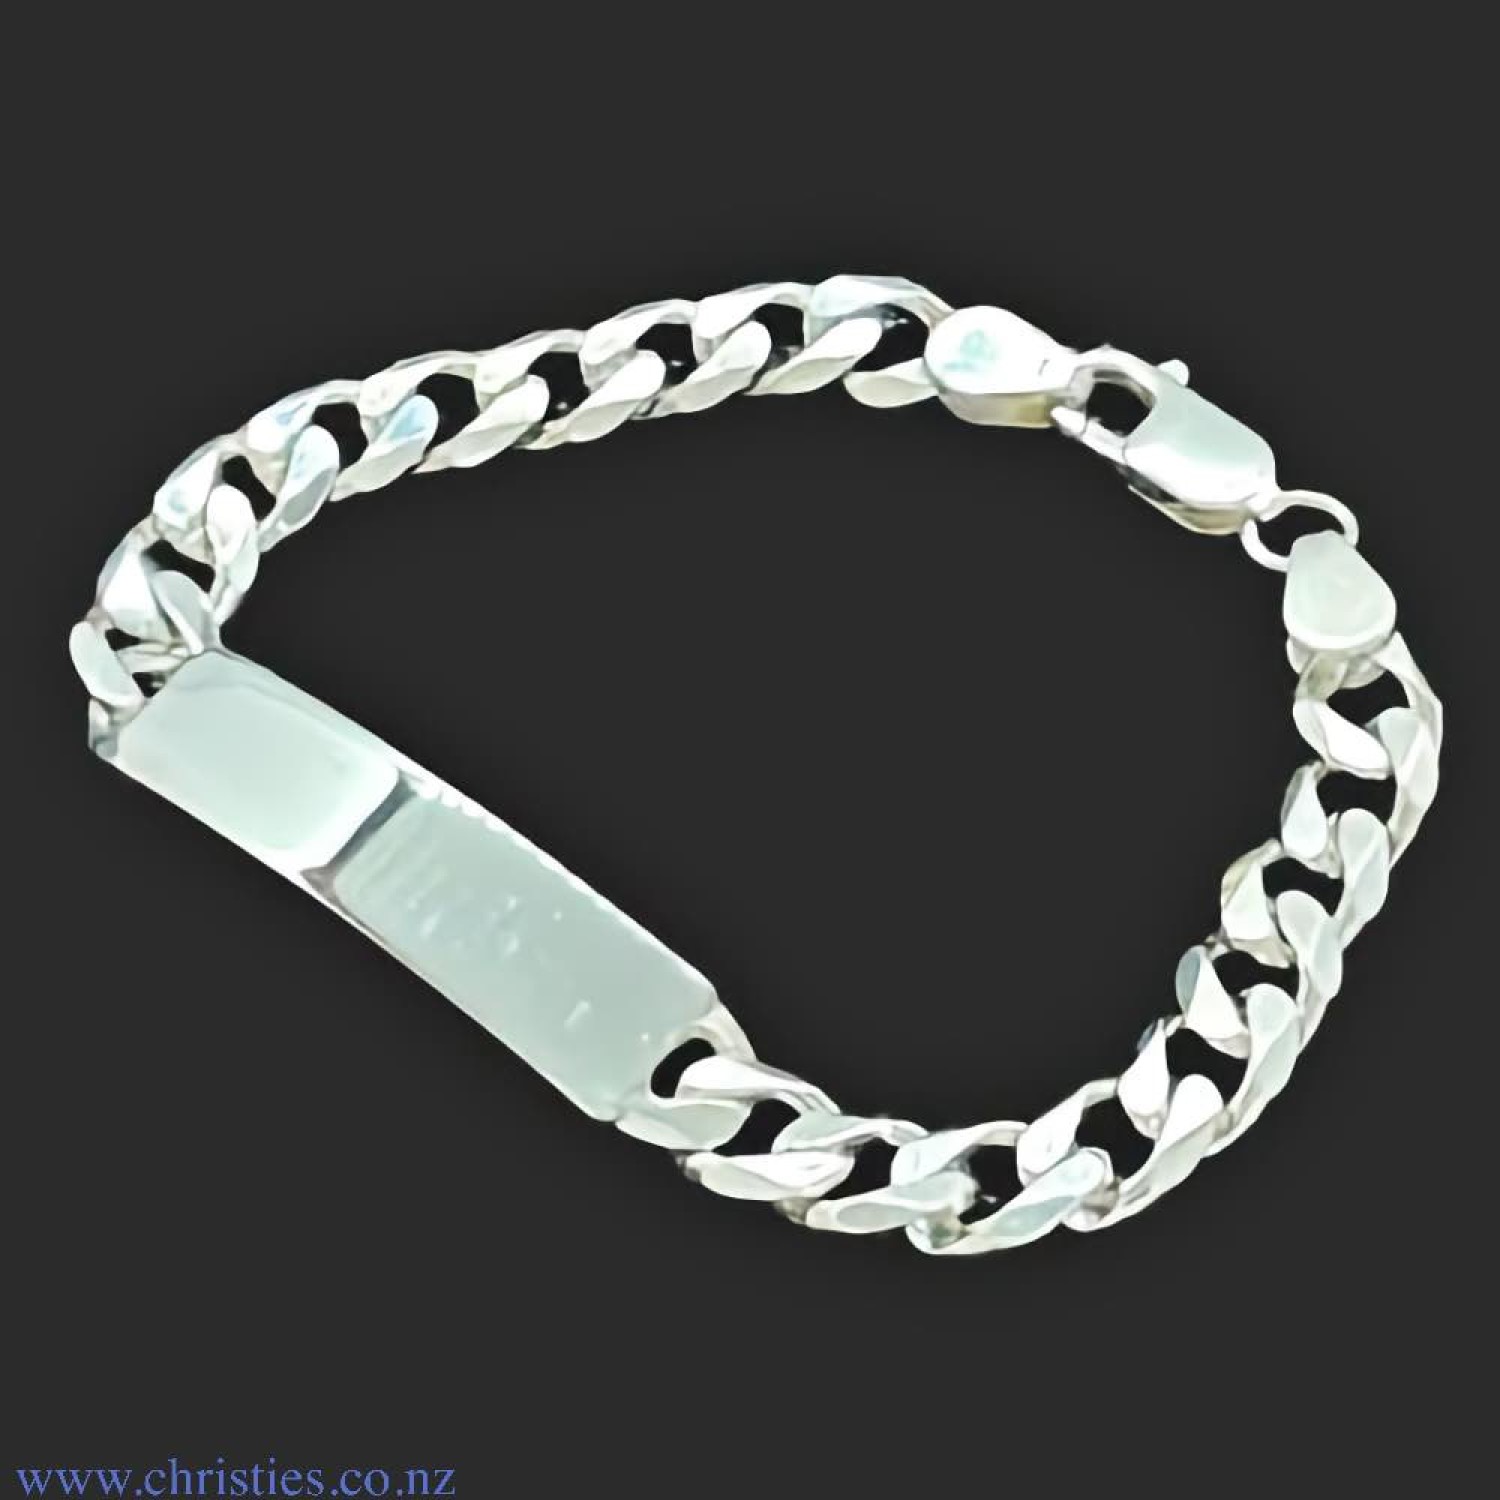 IDCD2200H6C19 Sterling Silver ID Curb Link Medium Bracelet. Medium weight  Identification bracelet crafted in 925 sterling silver  Afterpay - Split your purchase into 4 instalments - Pay for your purchase over 4 instalments, due every two weeks. You’ll pa